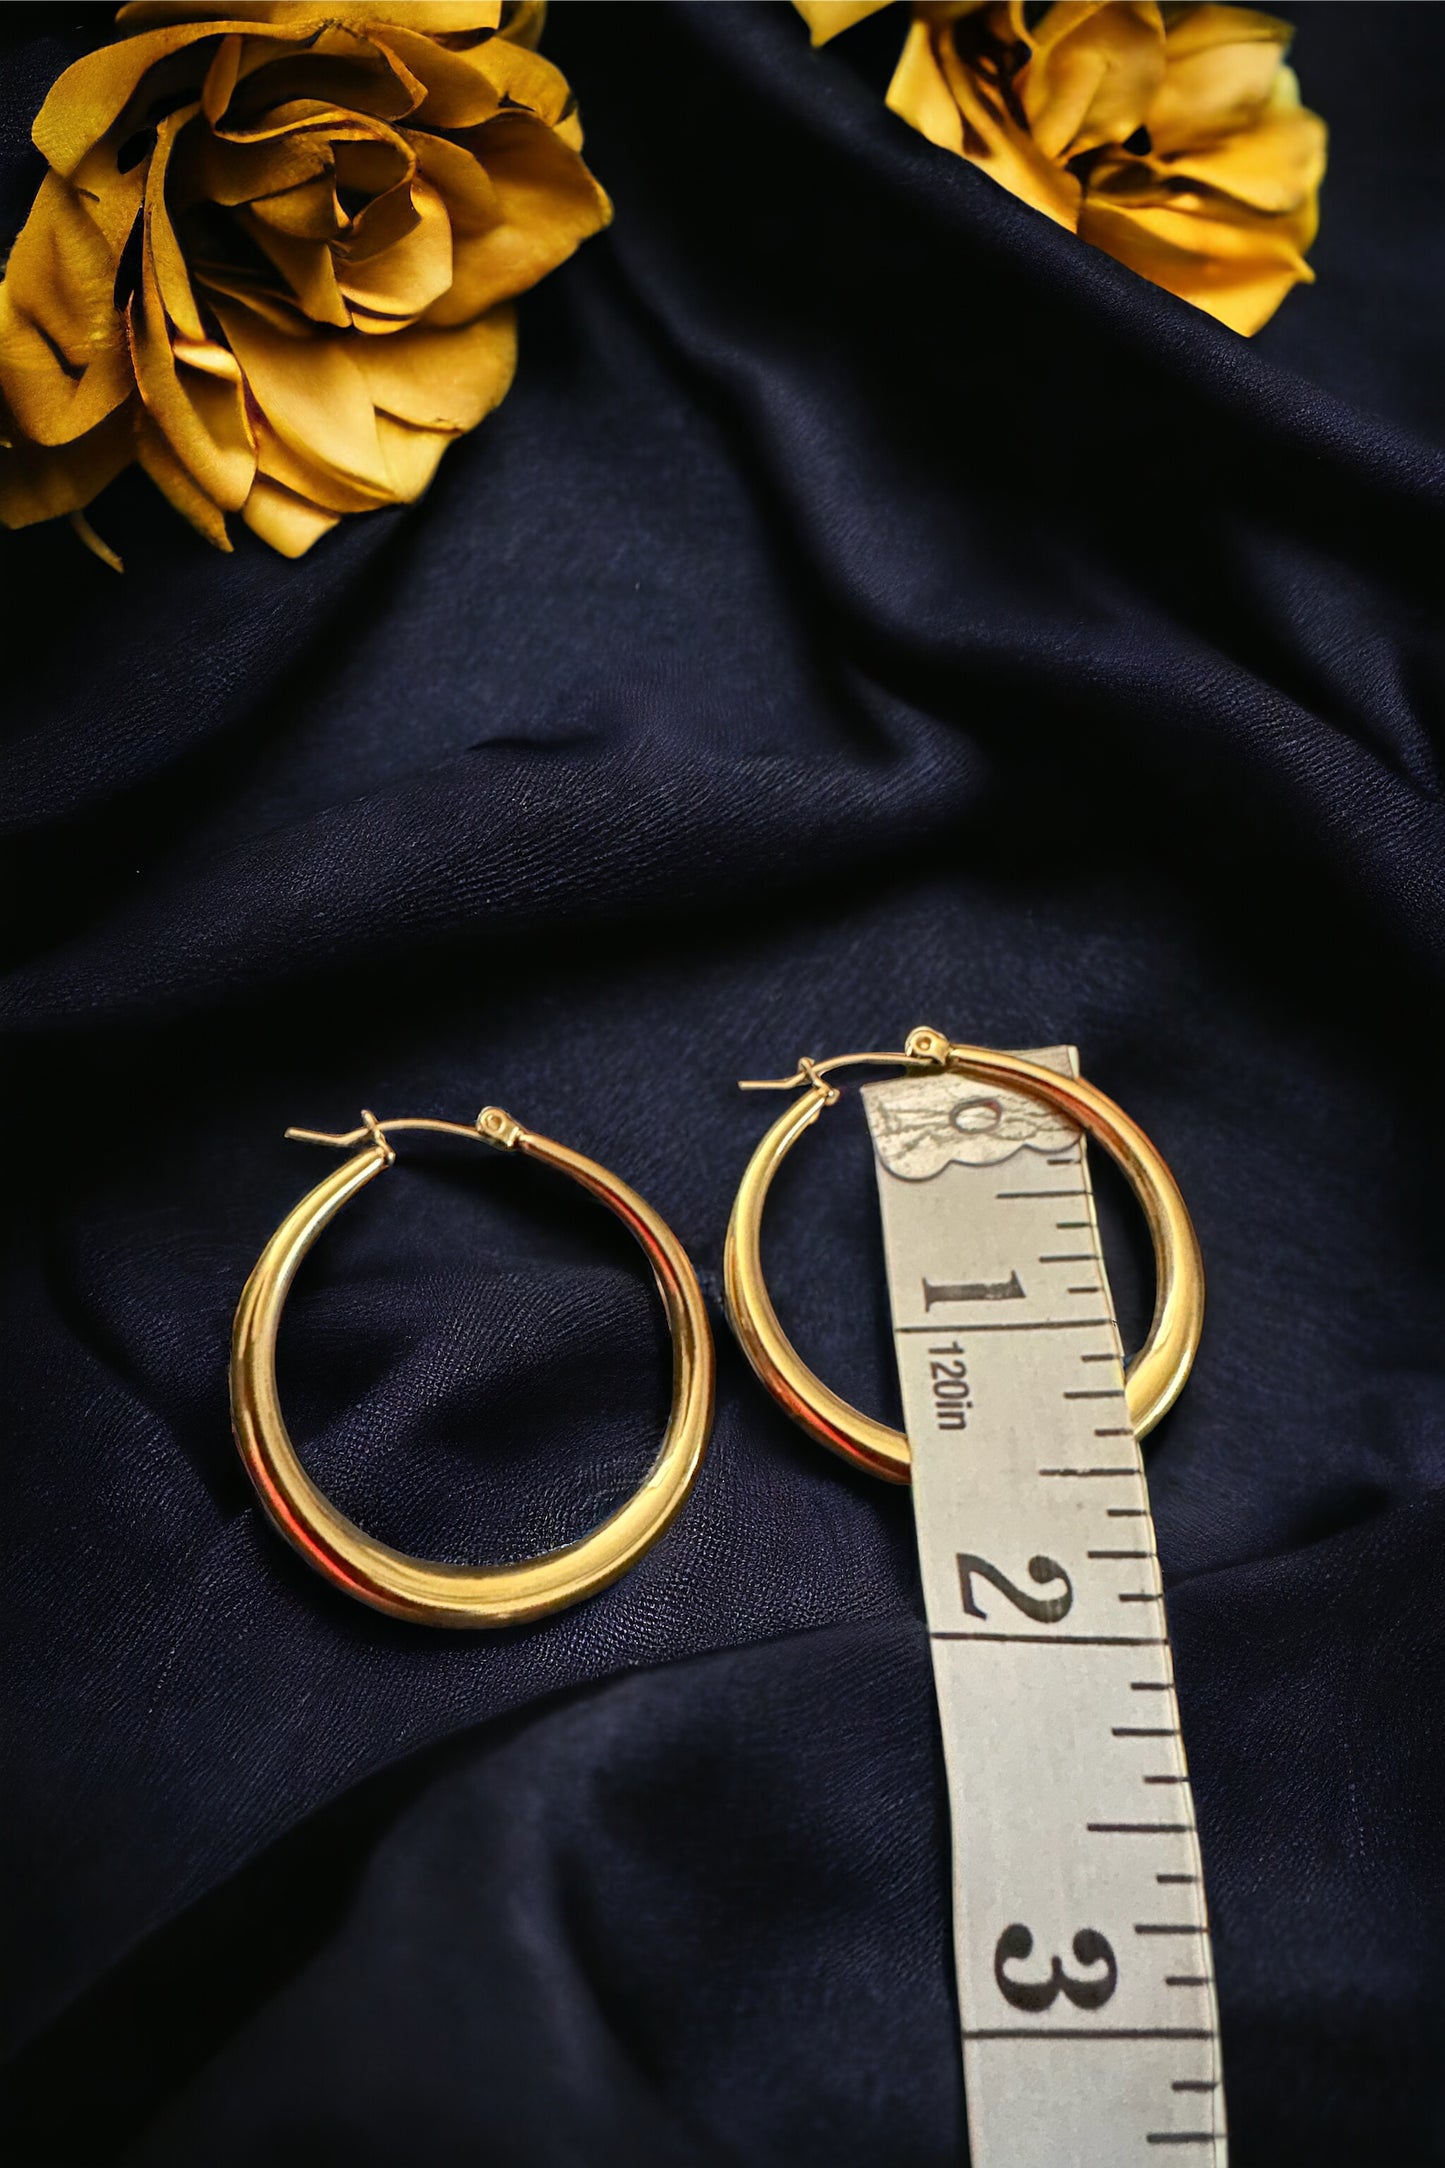 18K Gold-Plated Hoop Earrings - Makes a Great Gift!